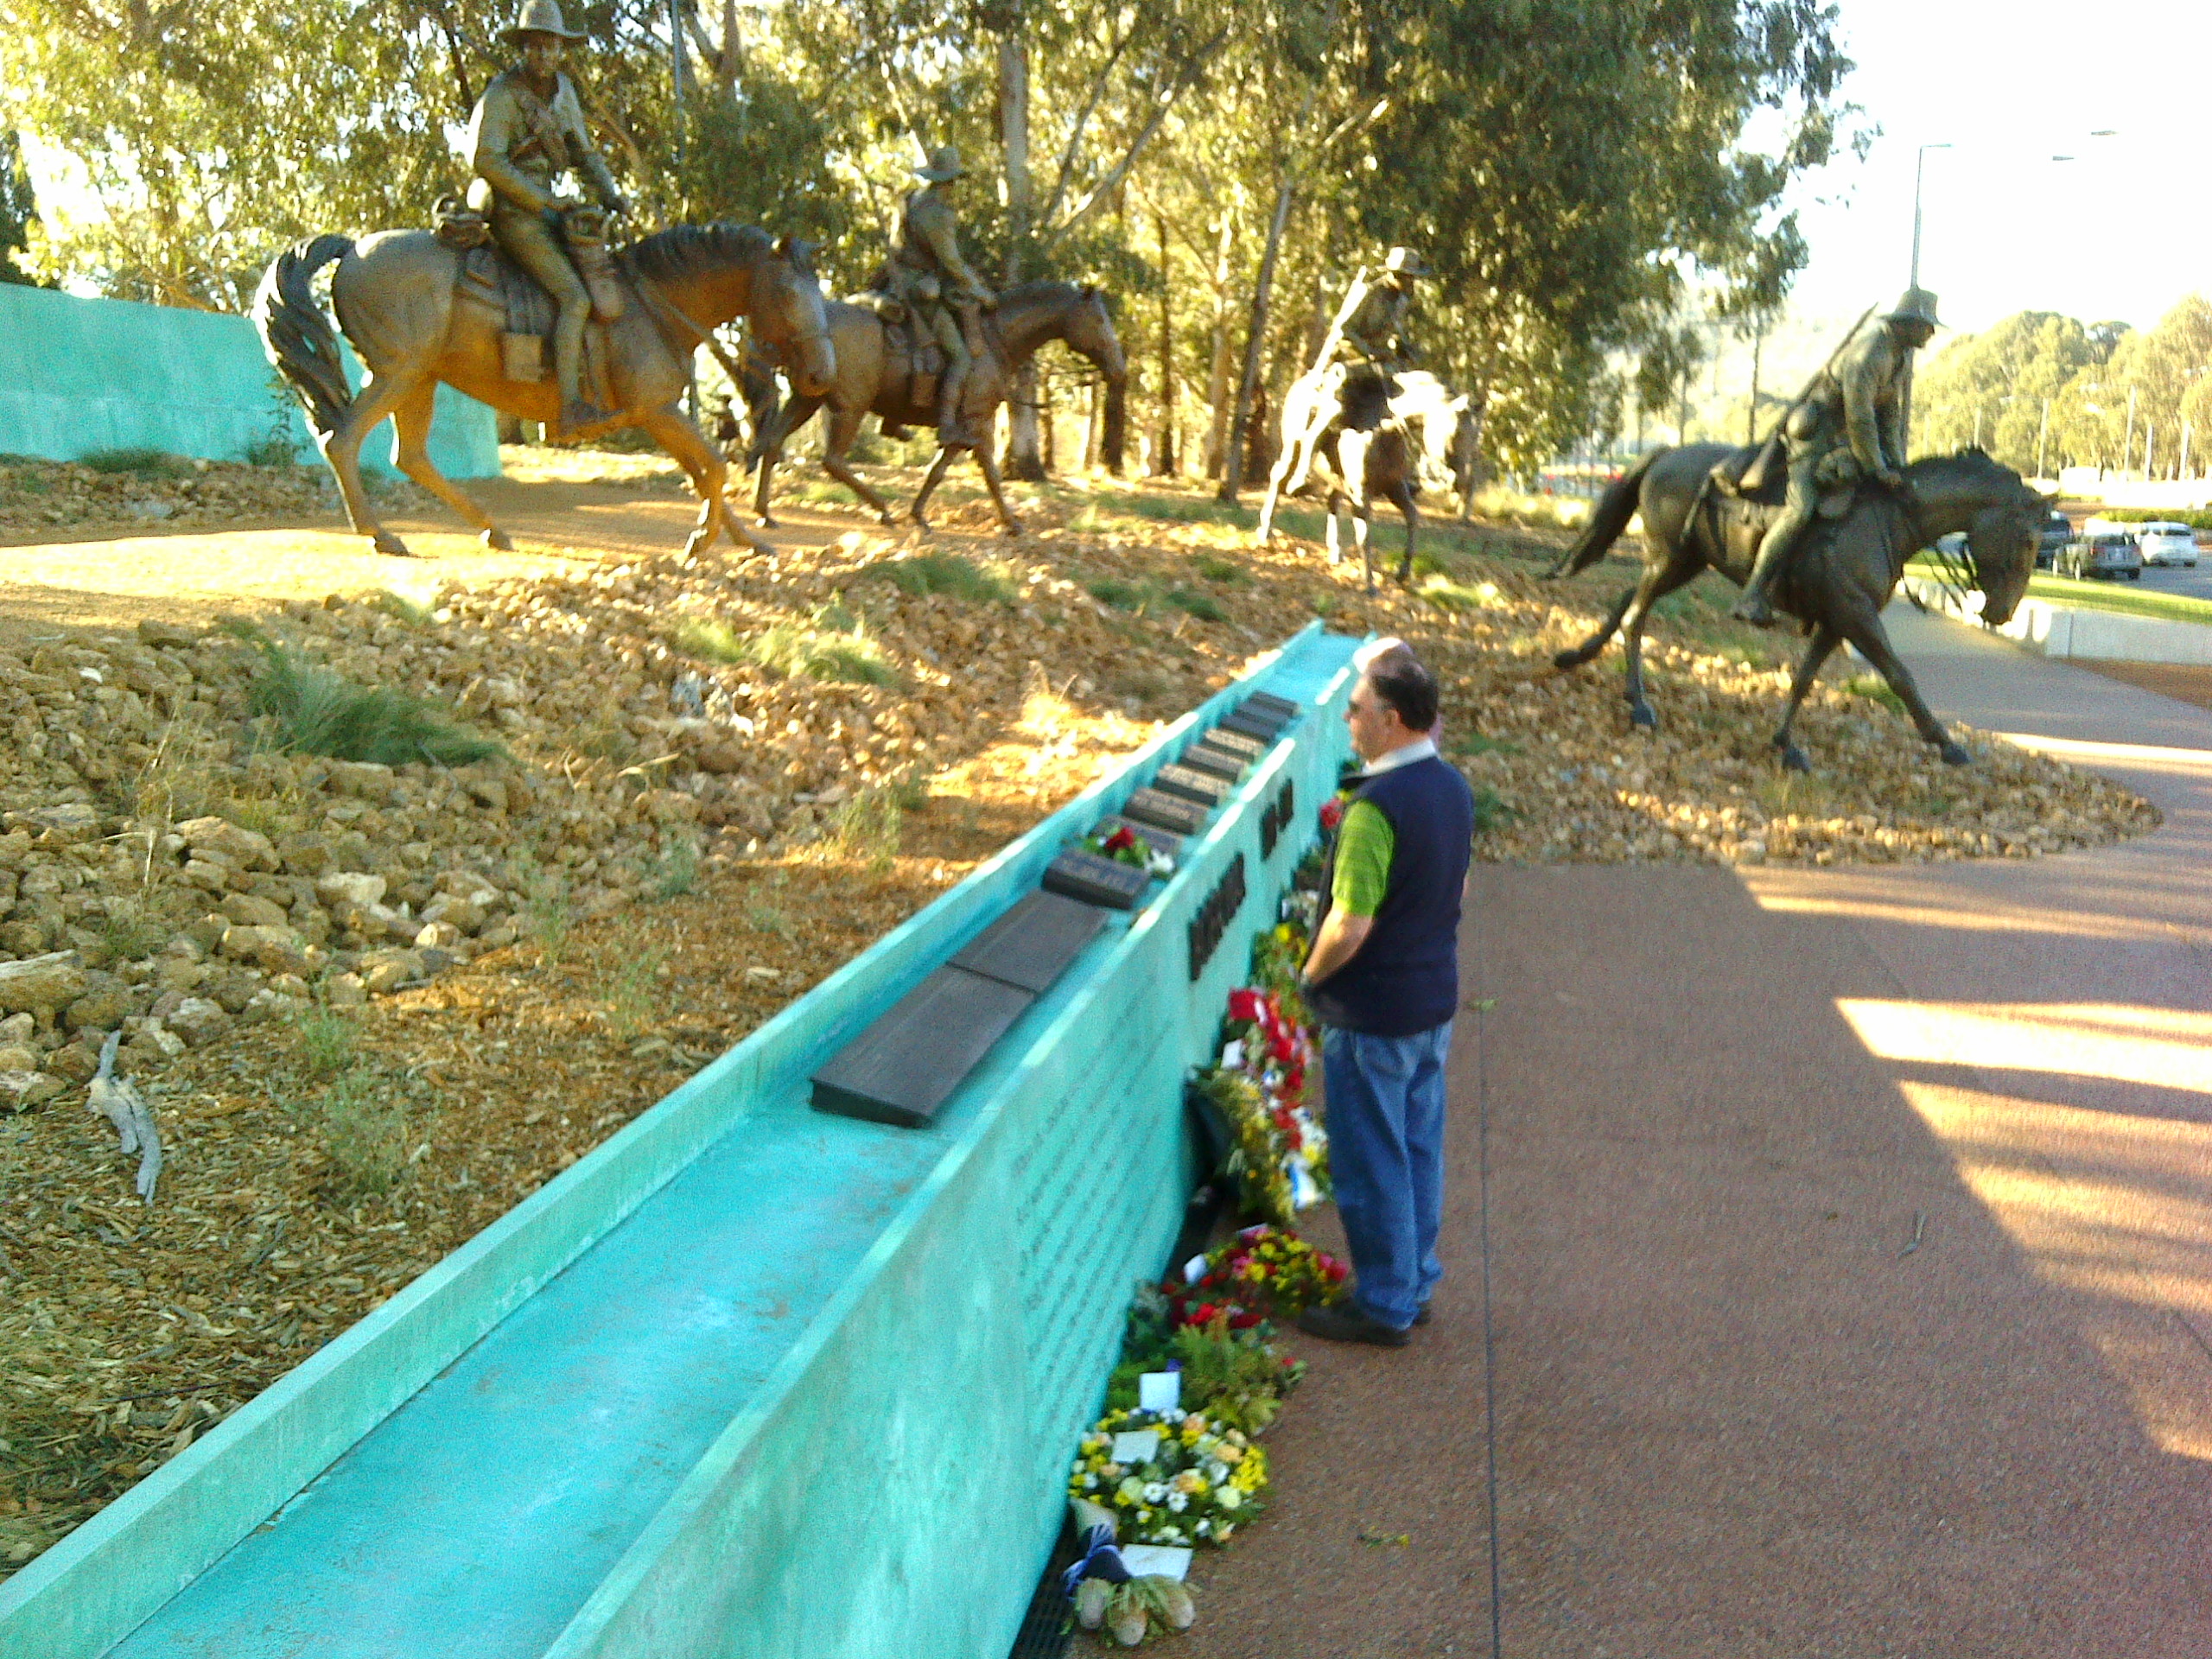 Four statues of soldiers riding horses, with an visitor standing on the sidewalk surrounded by flowers, observing the memorial.